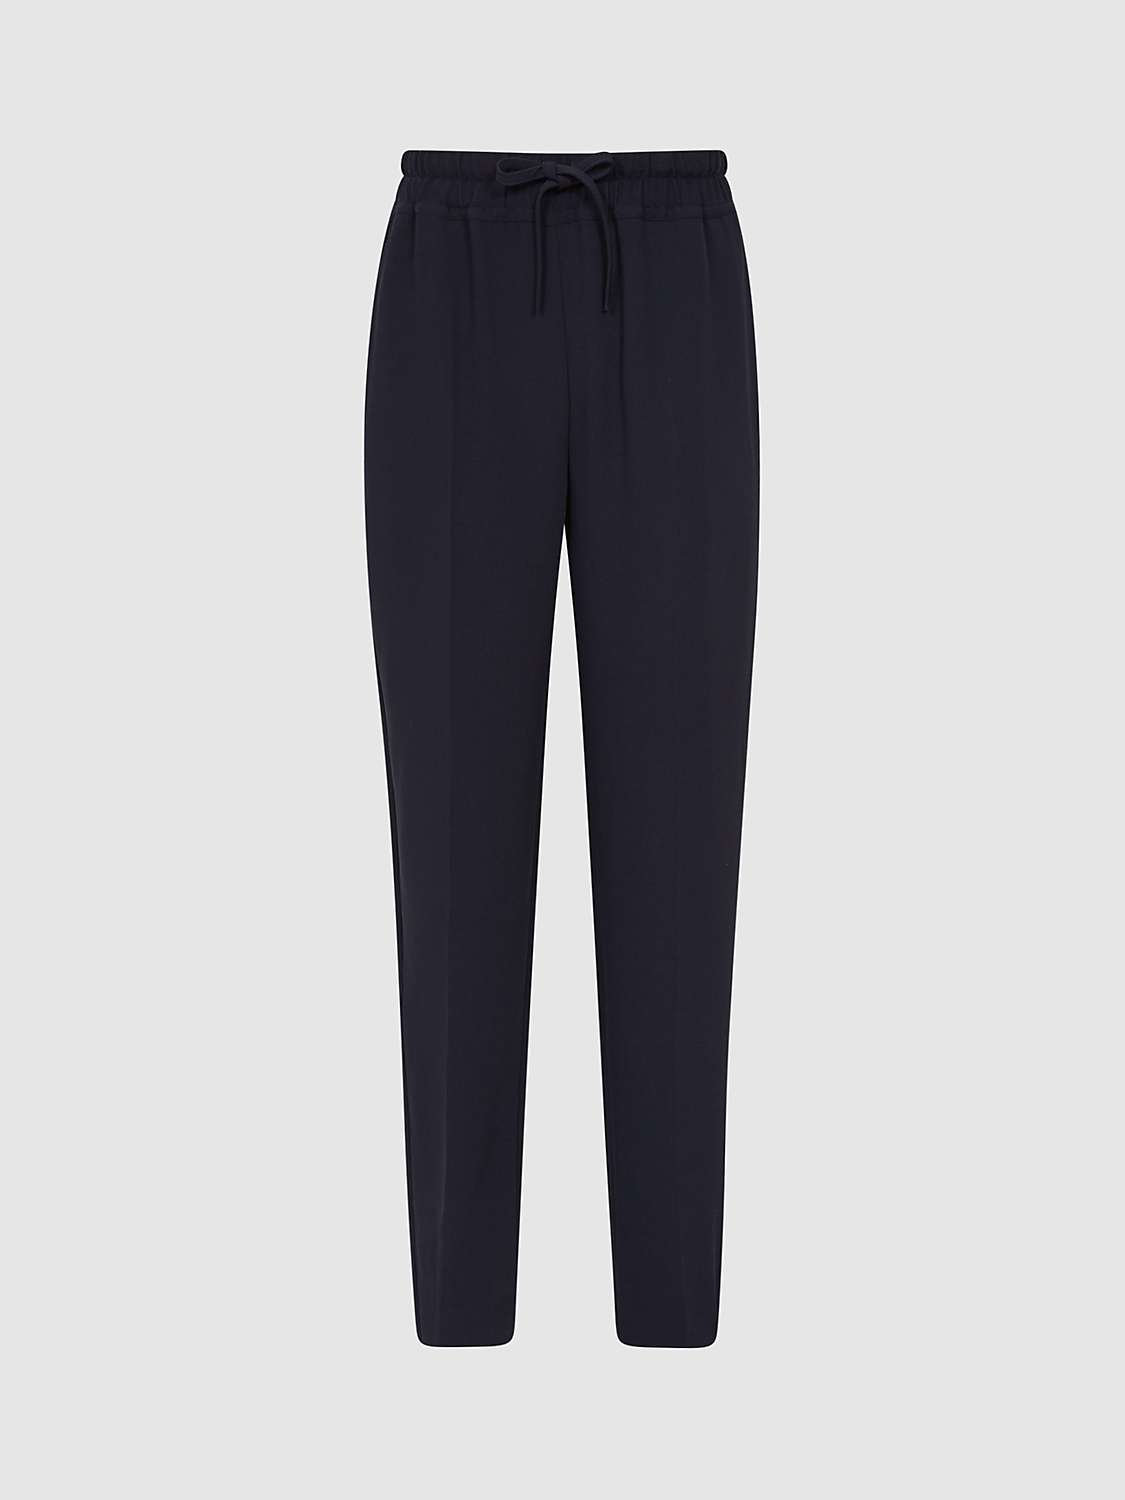 Buy Reiss Hailey Cropped Trousers Online at johnlewis.com